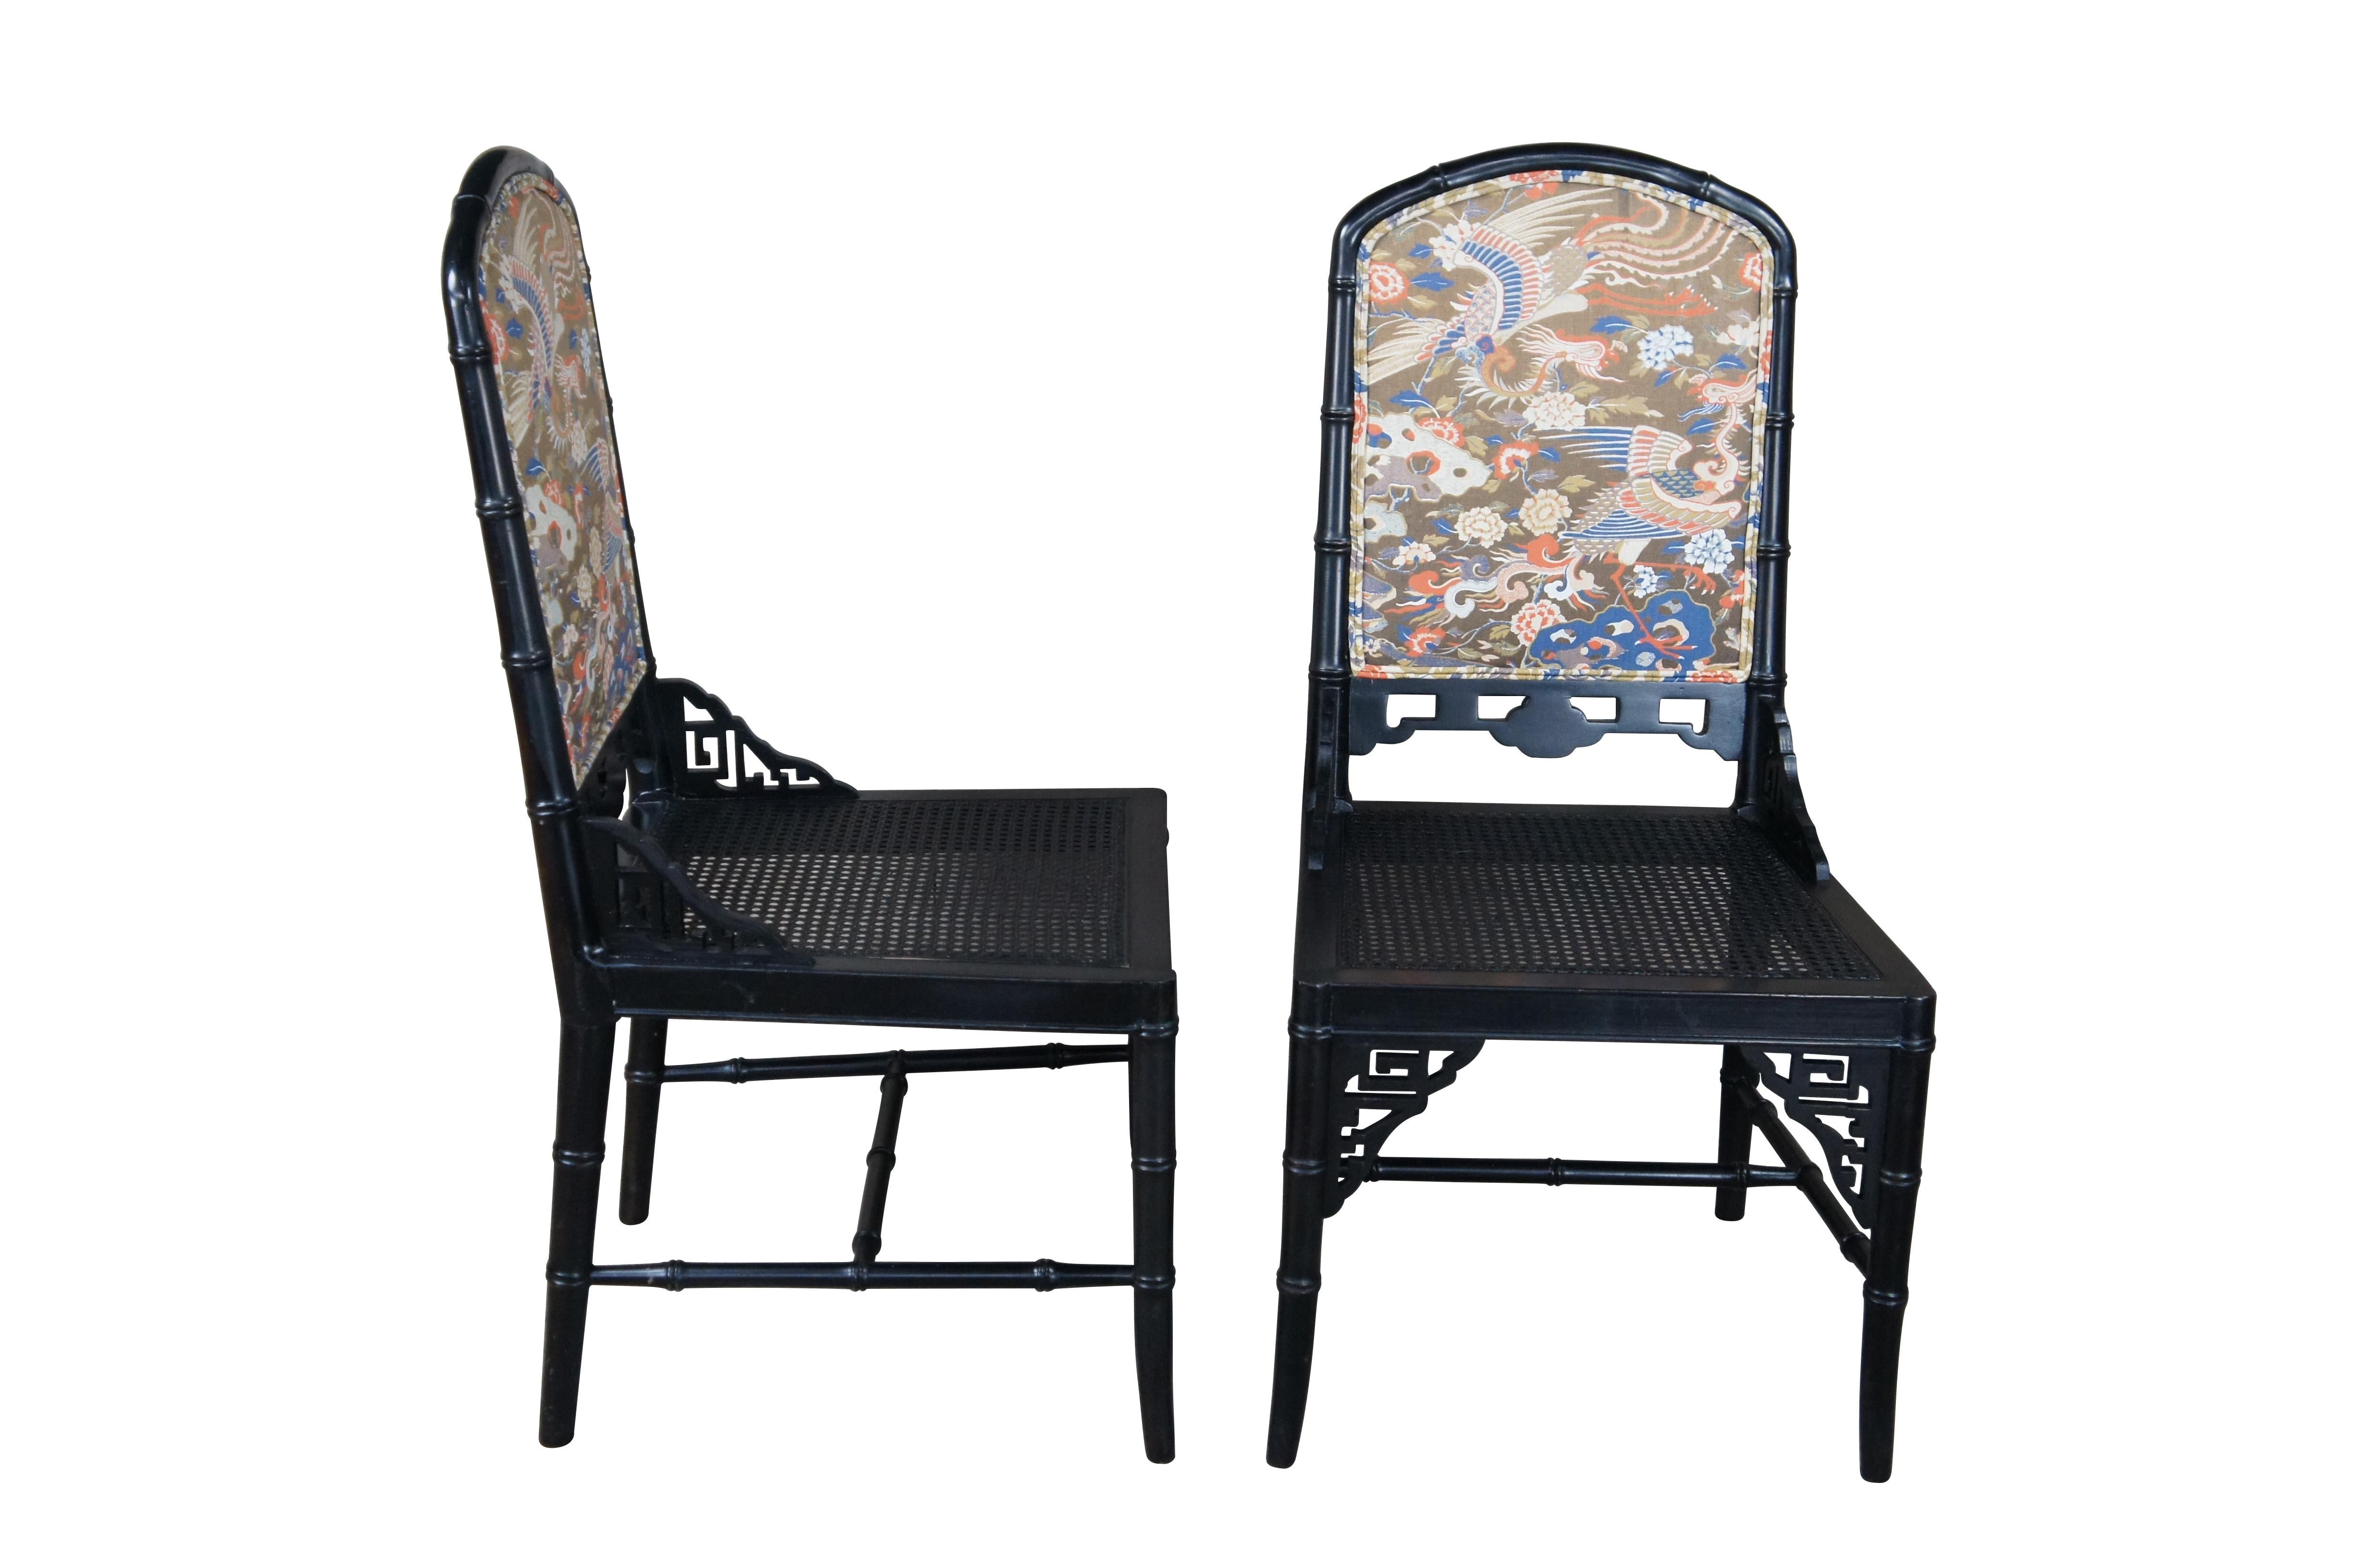 Four mid century faux bamboo caned dining chairs featuring black lacquered finish with reticulated accents and Crane theme upholstery.

Dimensions:
19.5